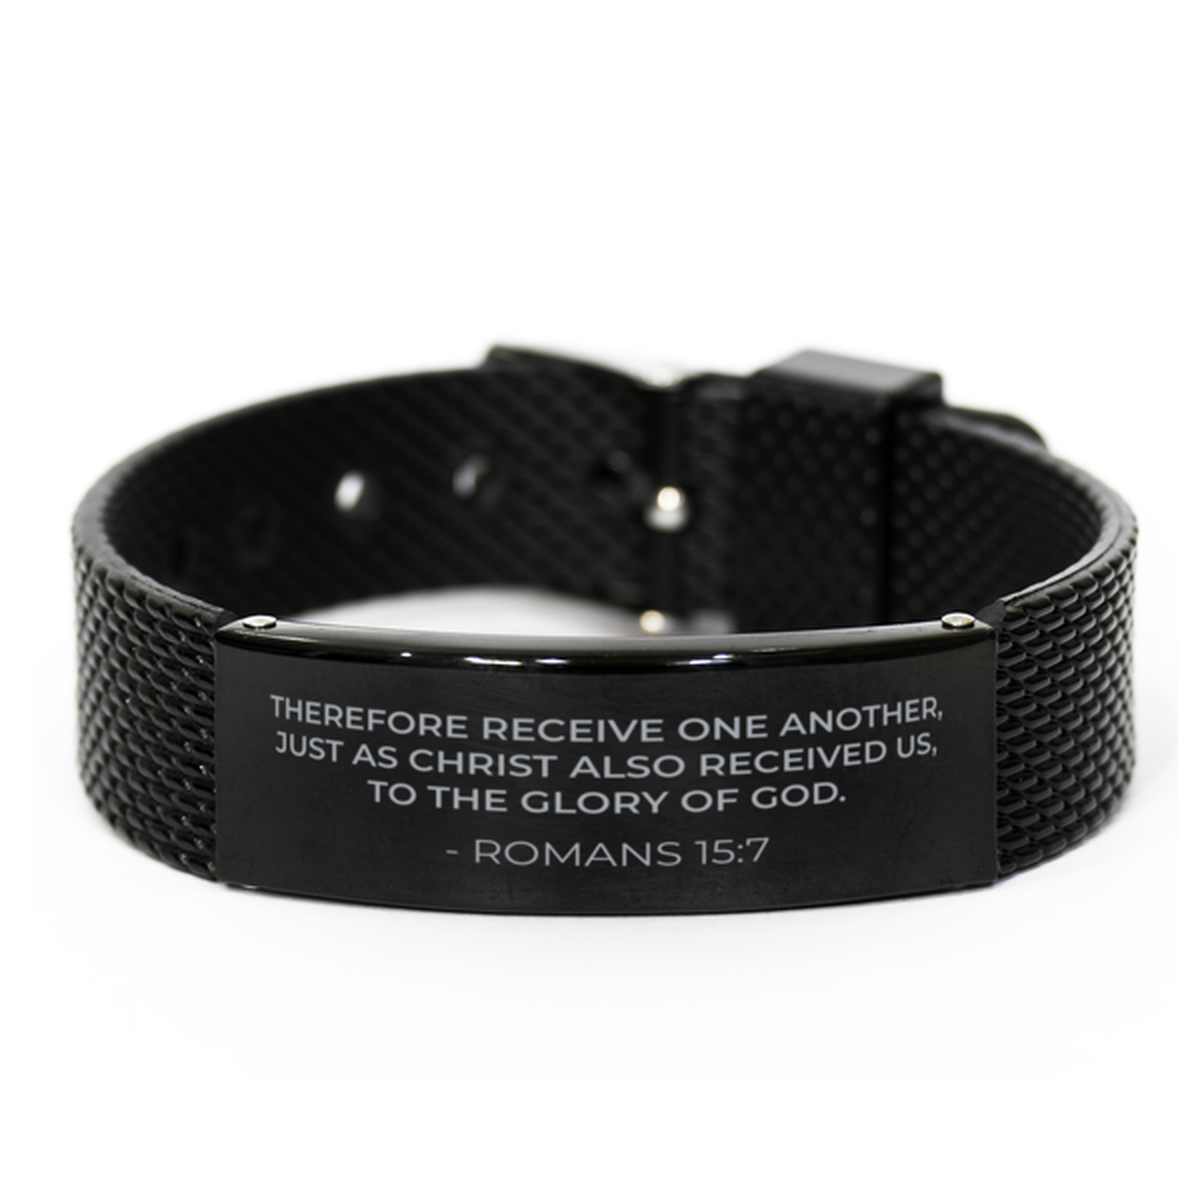 Christian Black Bracelet,, Romans 15:7 Therefore Receive One Another, Just As Christ, Motivational Bible Verse Gifts For Men Women